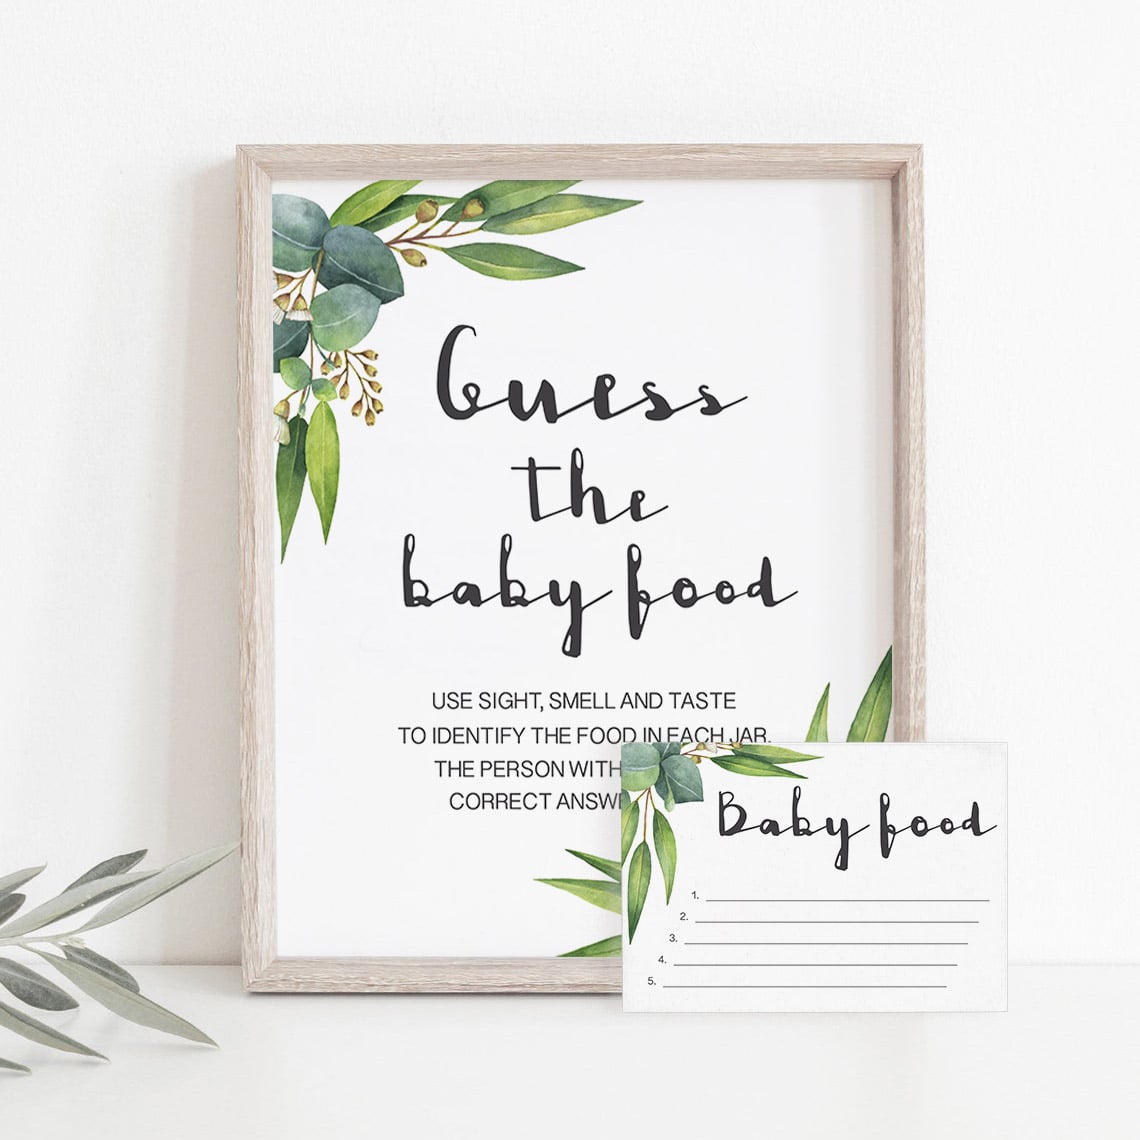 Guess the food babyshower game greenery themed by LittleSizzle